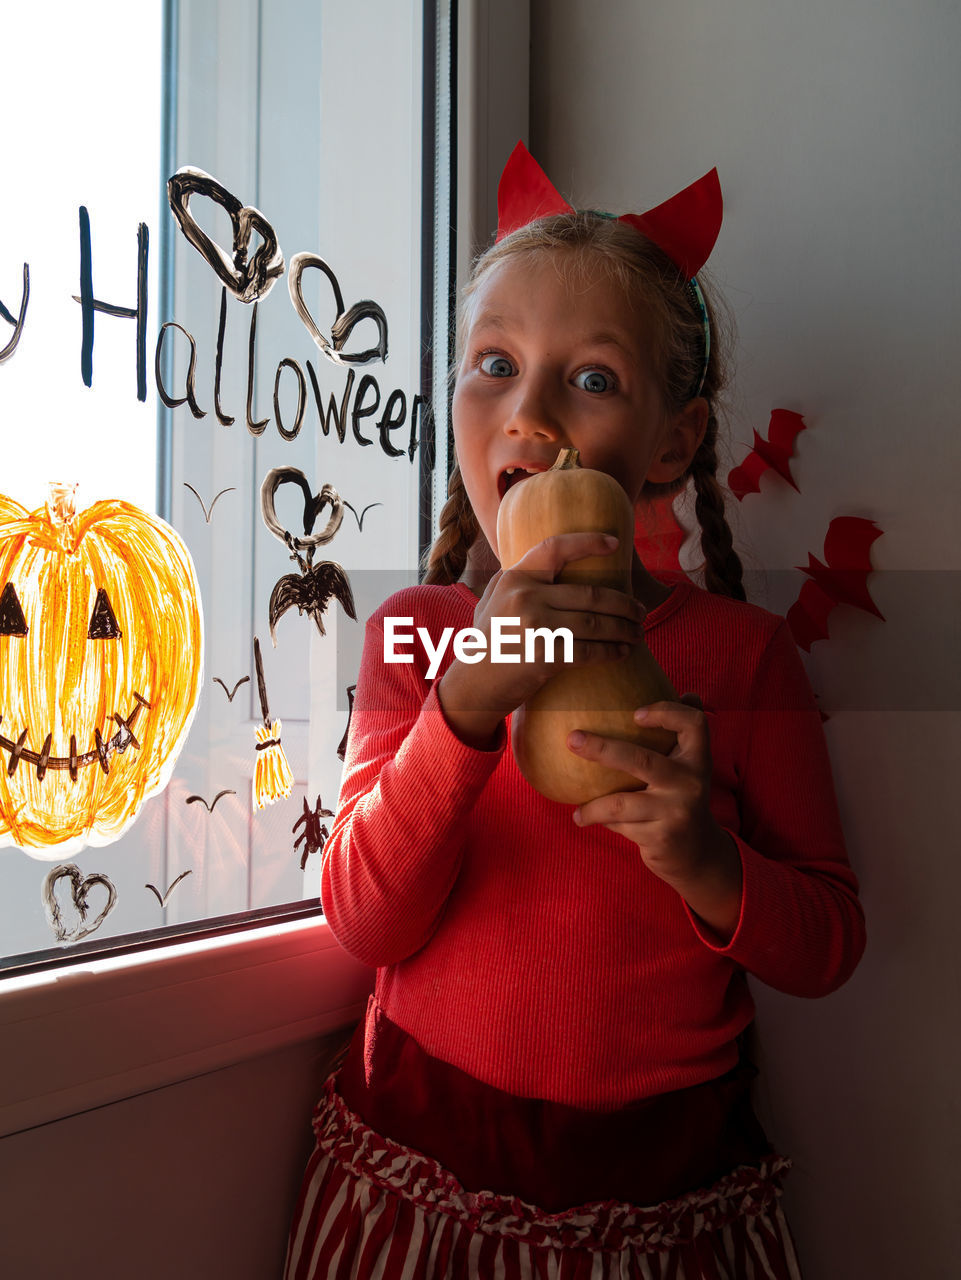 Child chewing pumpkin painting on window preparing to celebrate halloween little girl decorates room